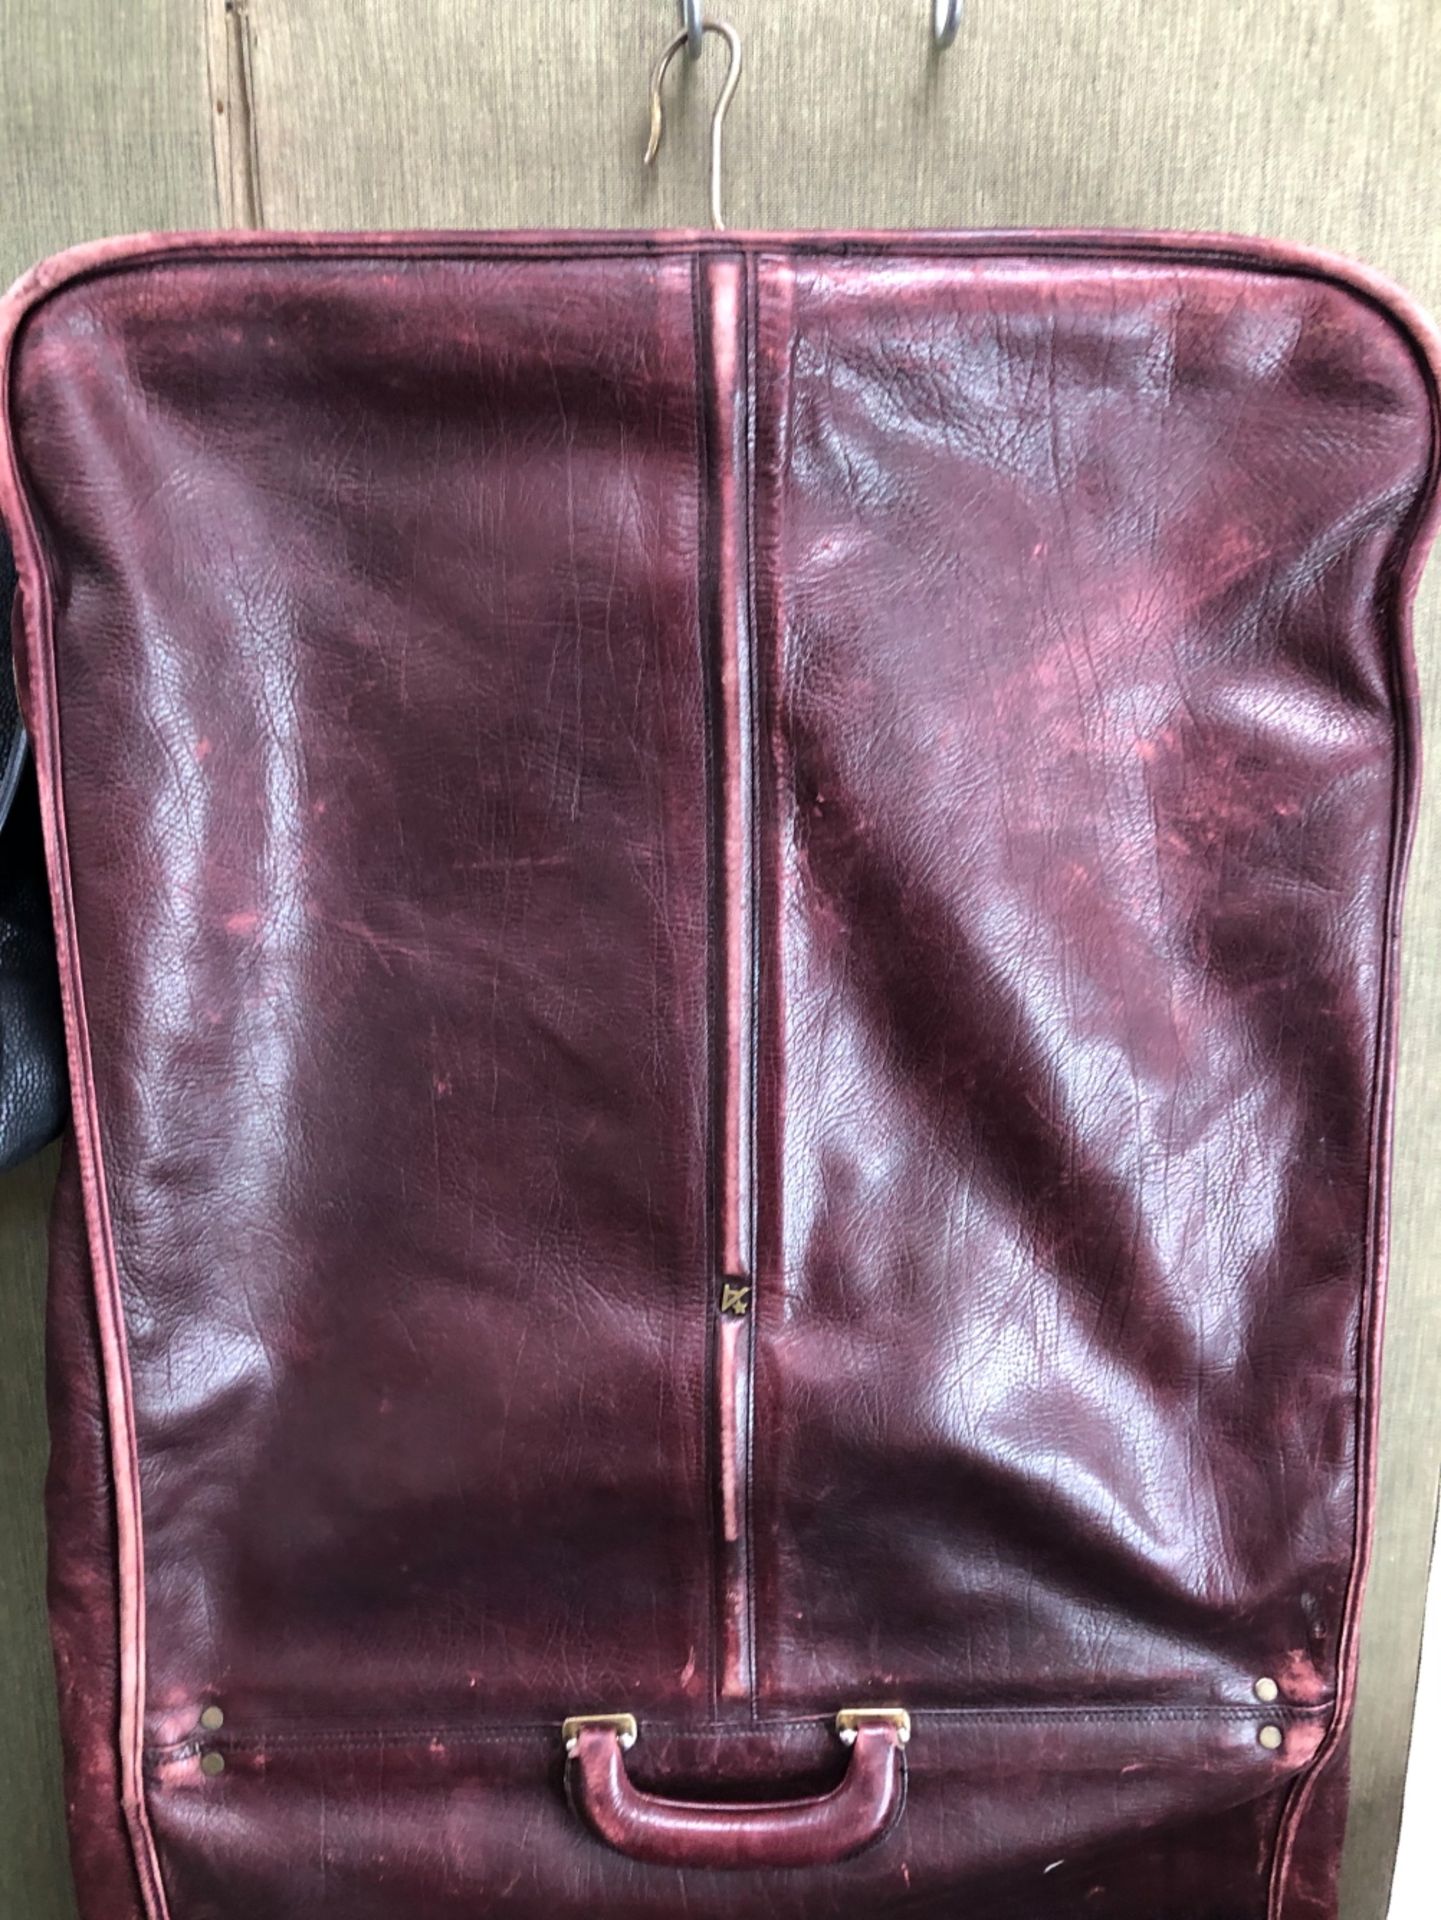 A BURGUNDY HEAVY LEATHER SUIT CARRIER WITH A BLACK SUEDETTE TRAVEL BAG (2) - Image 2 of 10